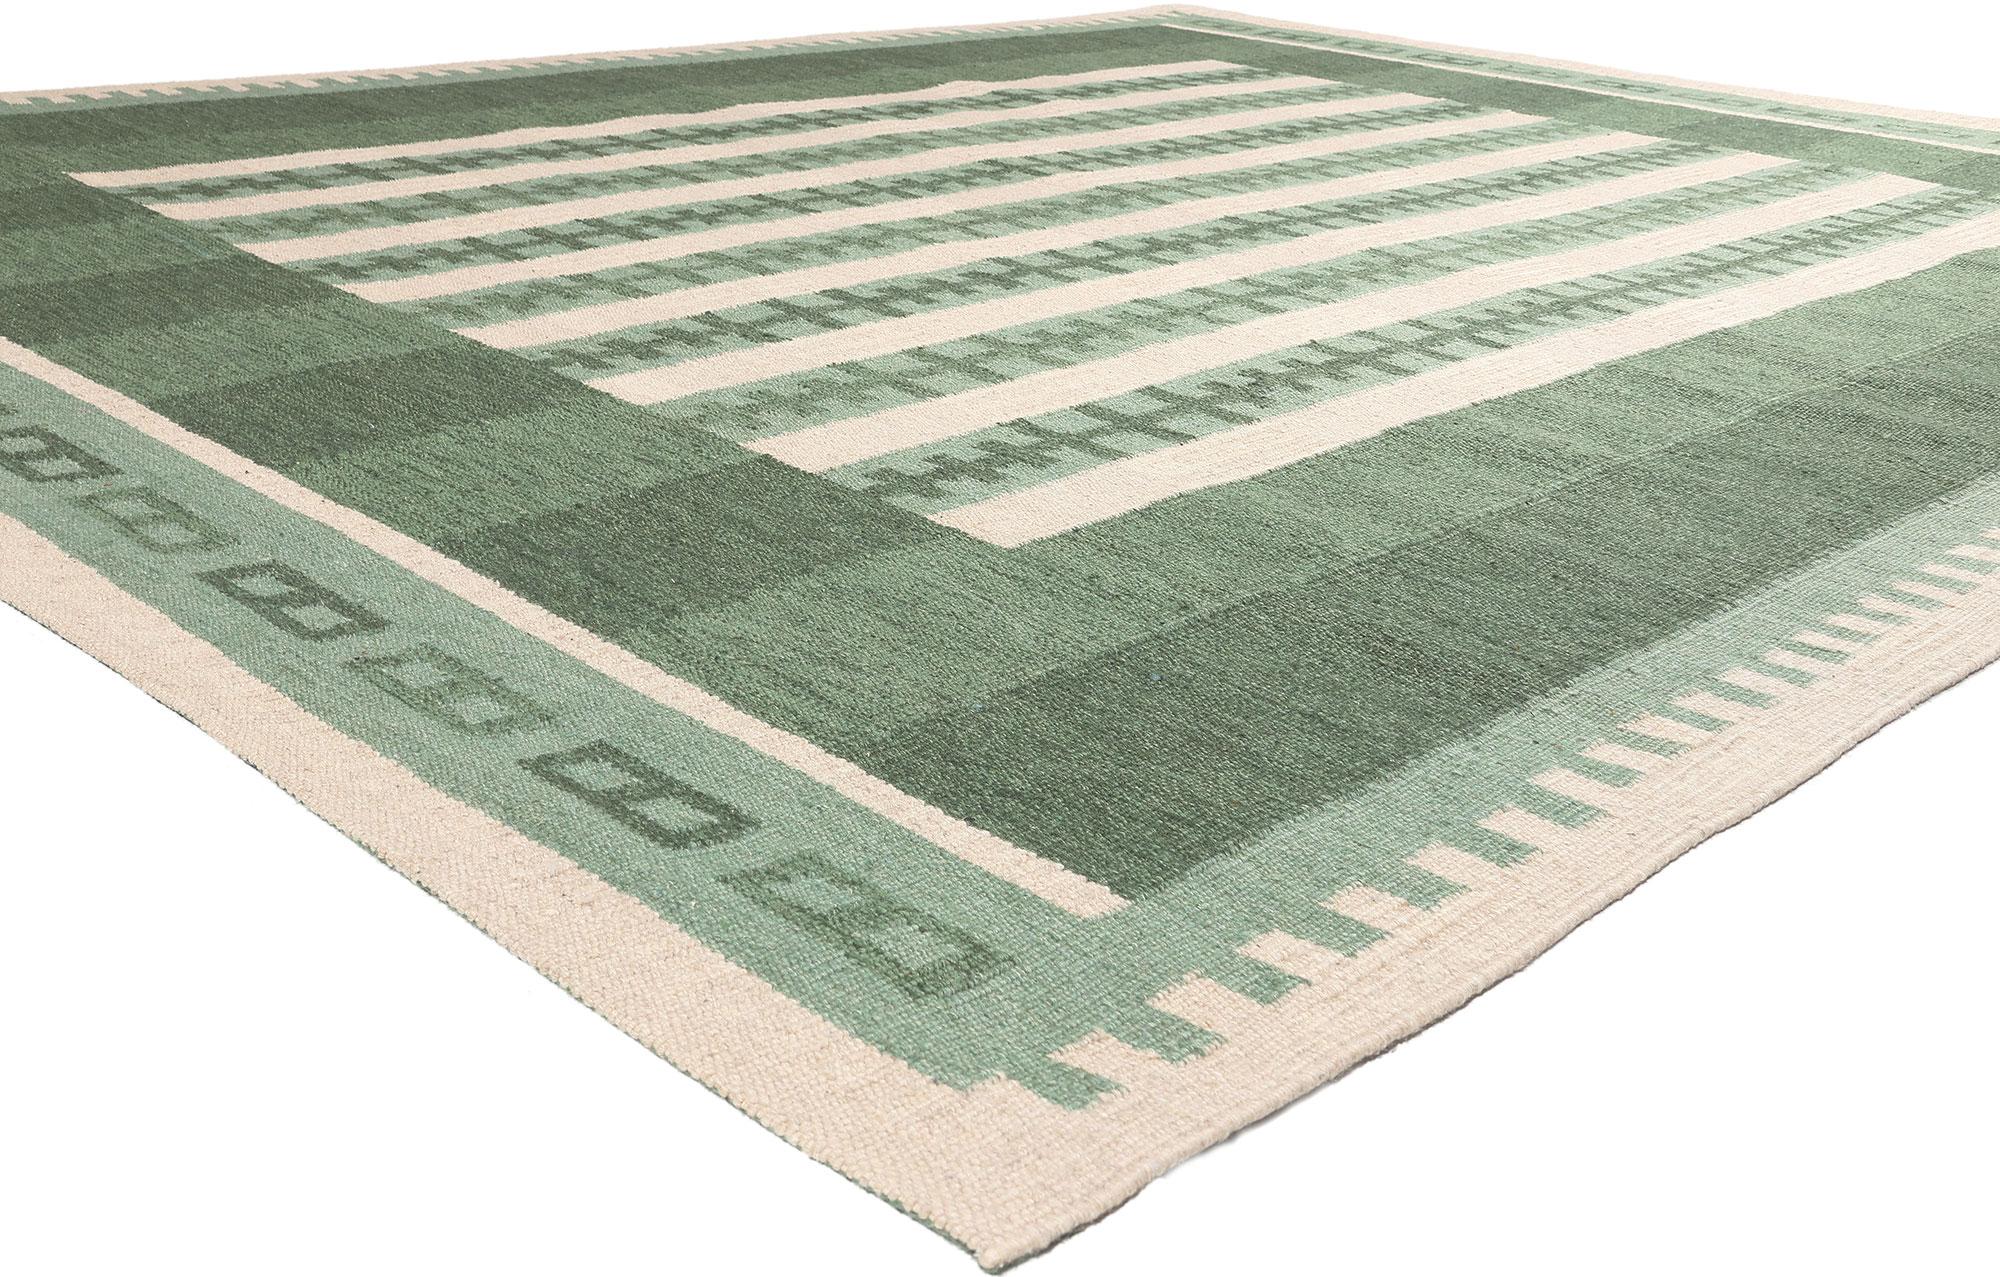 30975 Modern Swedish Inspired Kilim Rug, 09'06 x 11'11.
​Scandinavian Modern style meets Biophilic Design ​in this handwoven wool Swedish inspired kilim rug. The eye-catching geometric design and earthy colorway woven into this piece work together